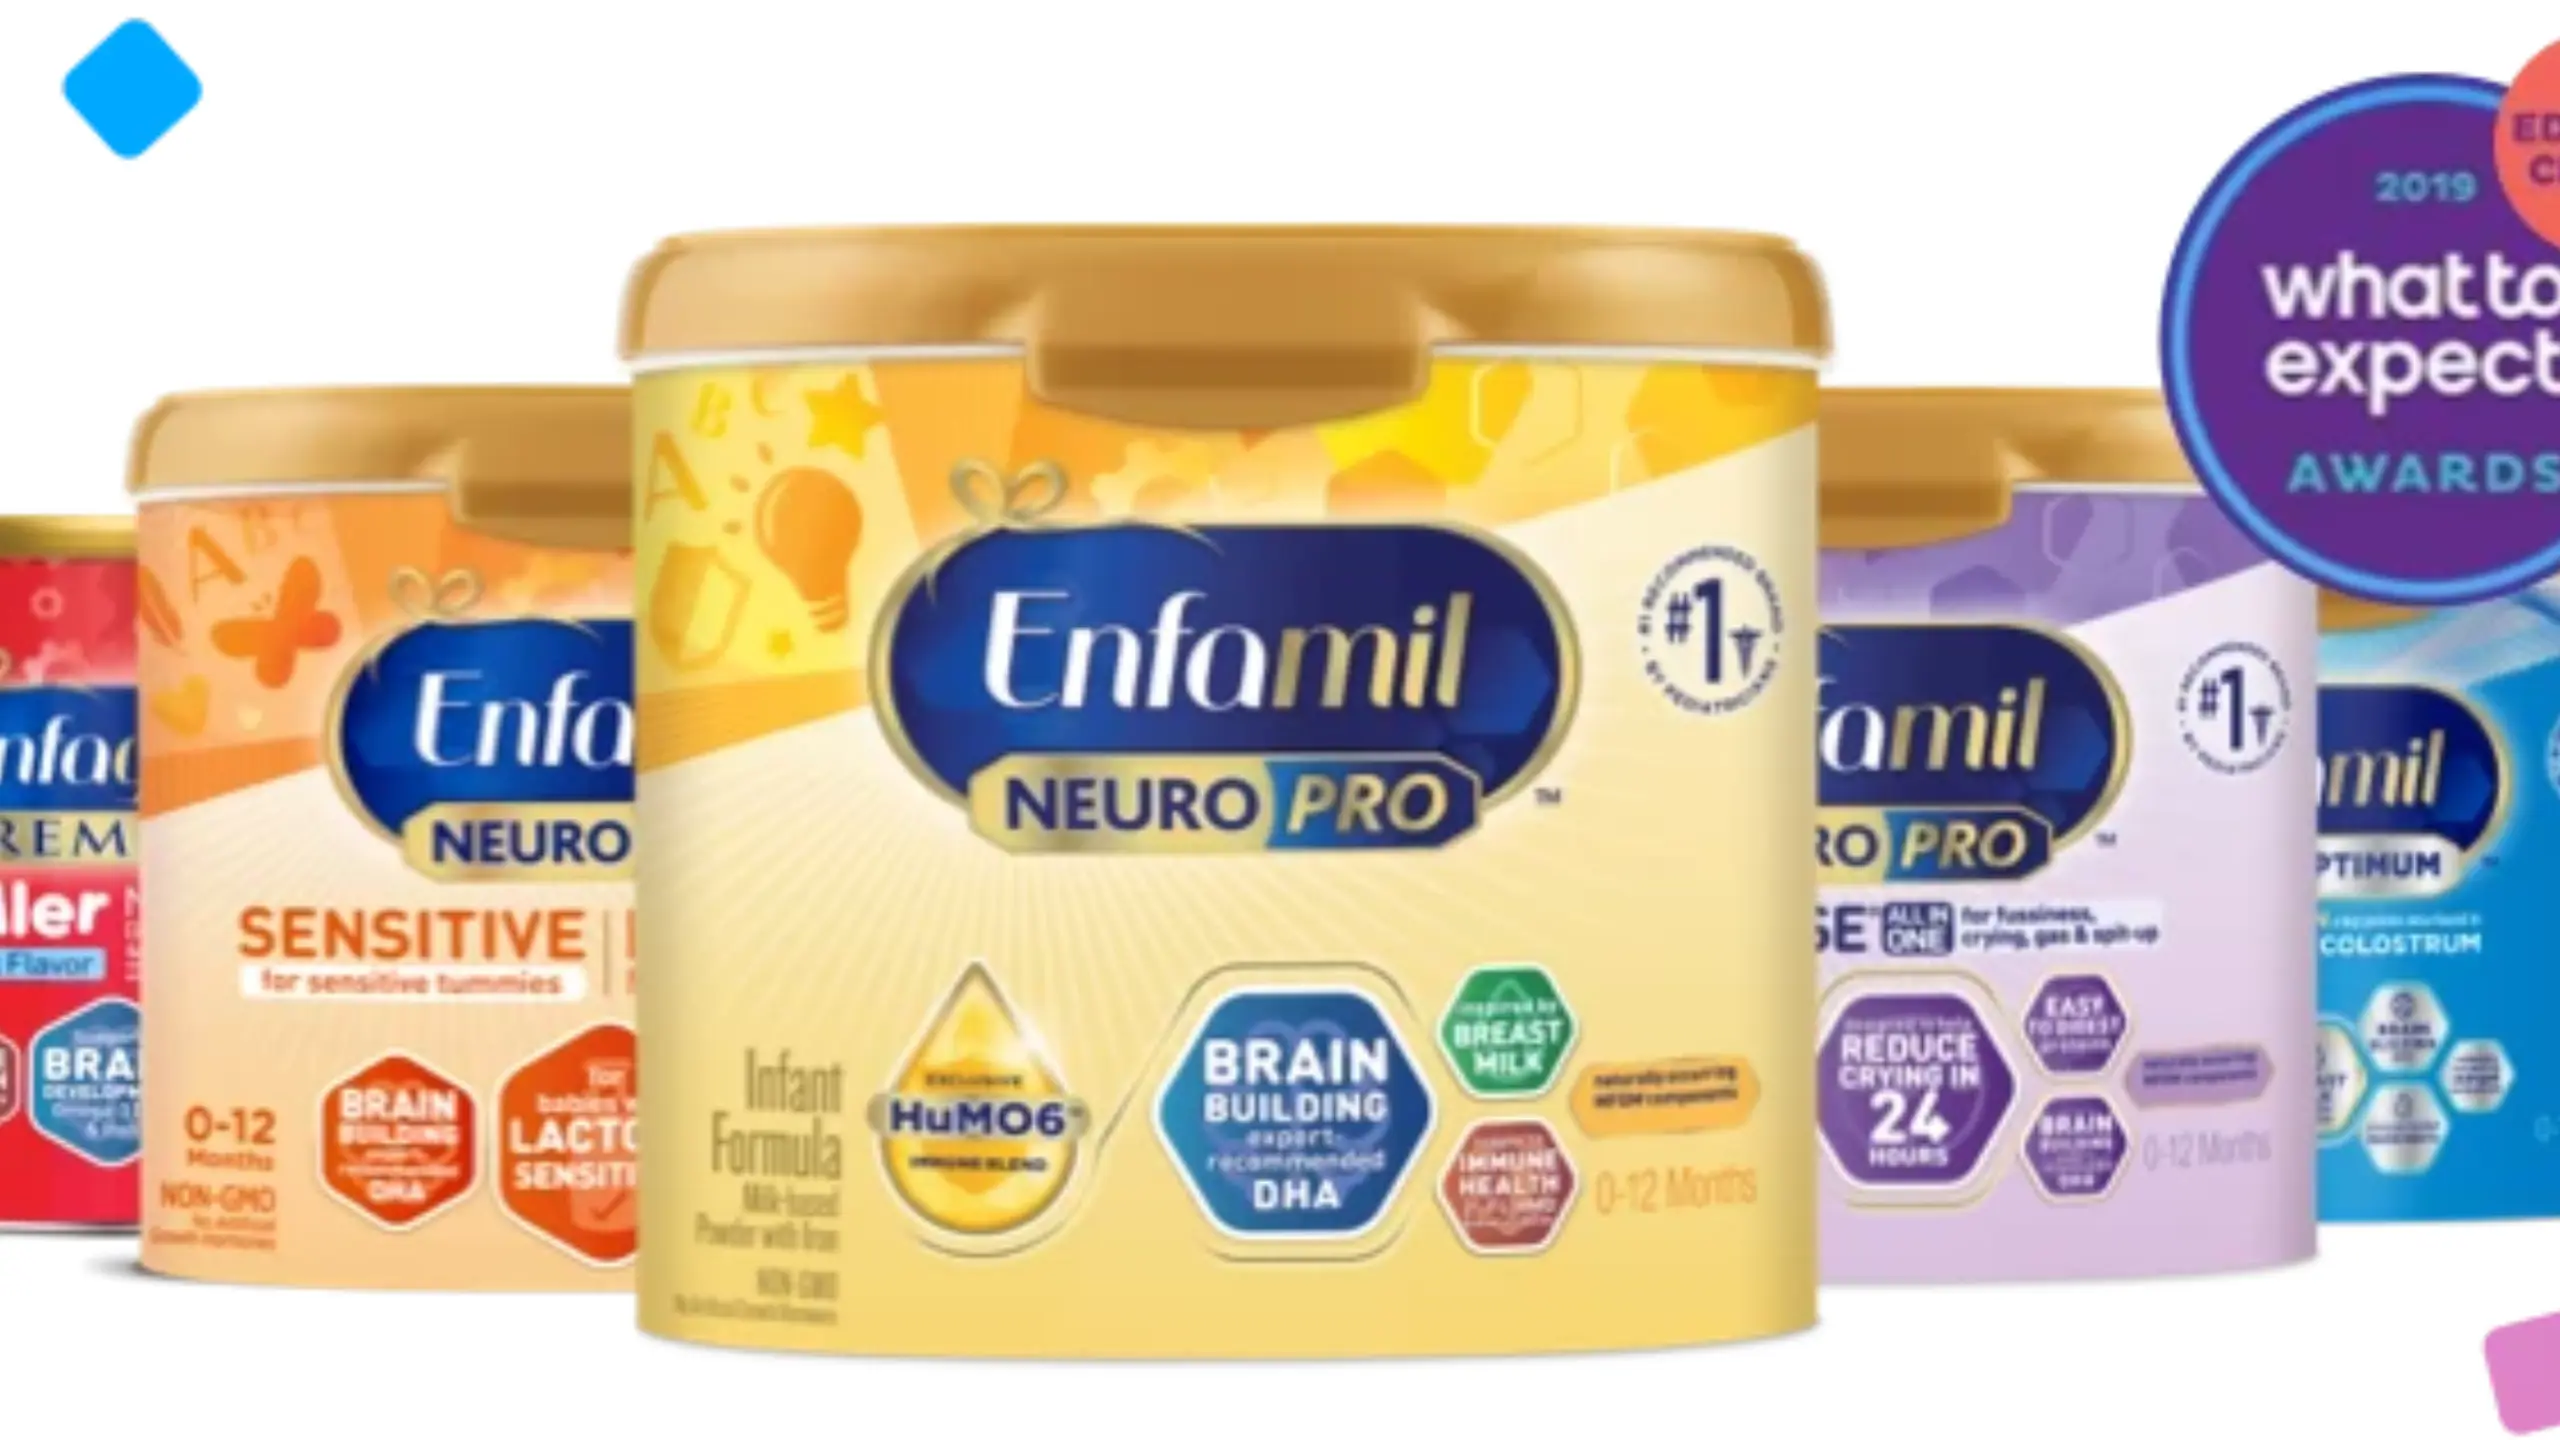 Enfamil Nourishing Your Baby's Growth and Development